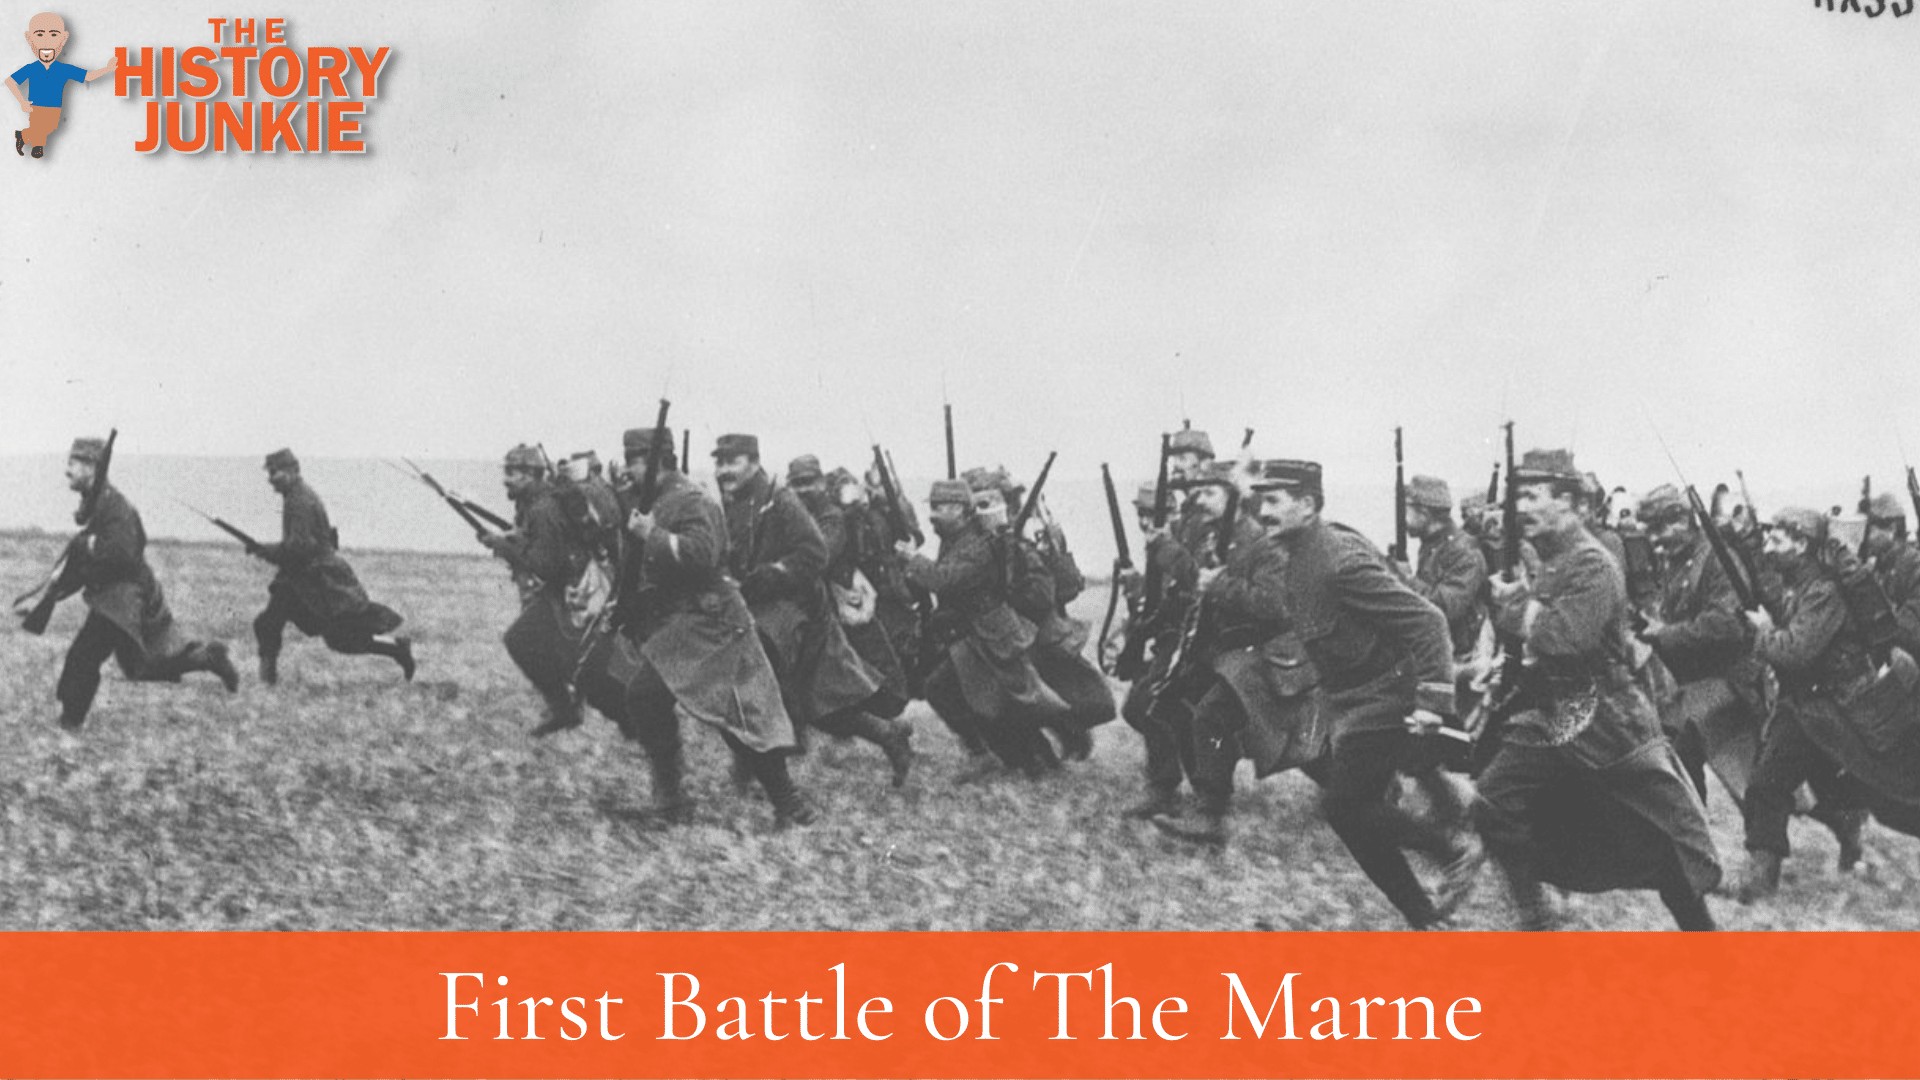 First Battle Of The Marne